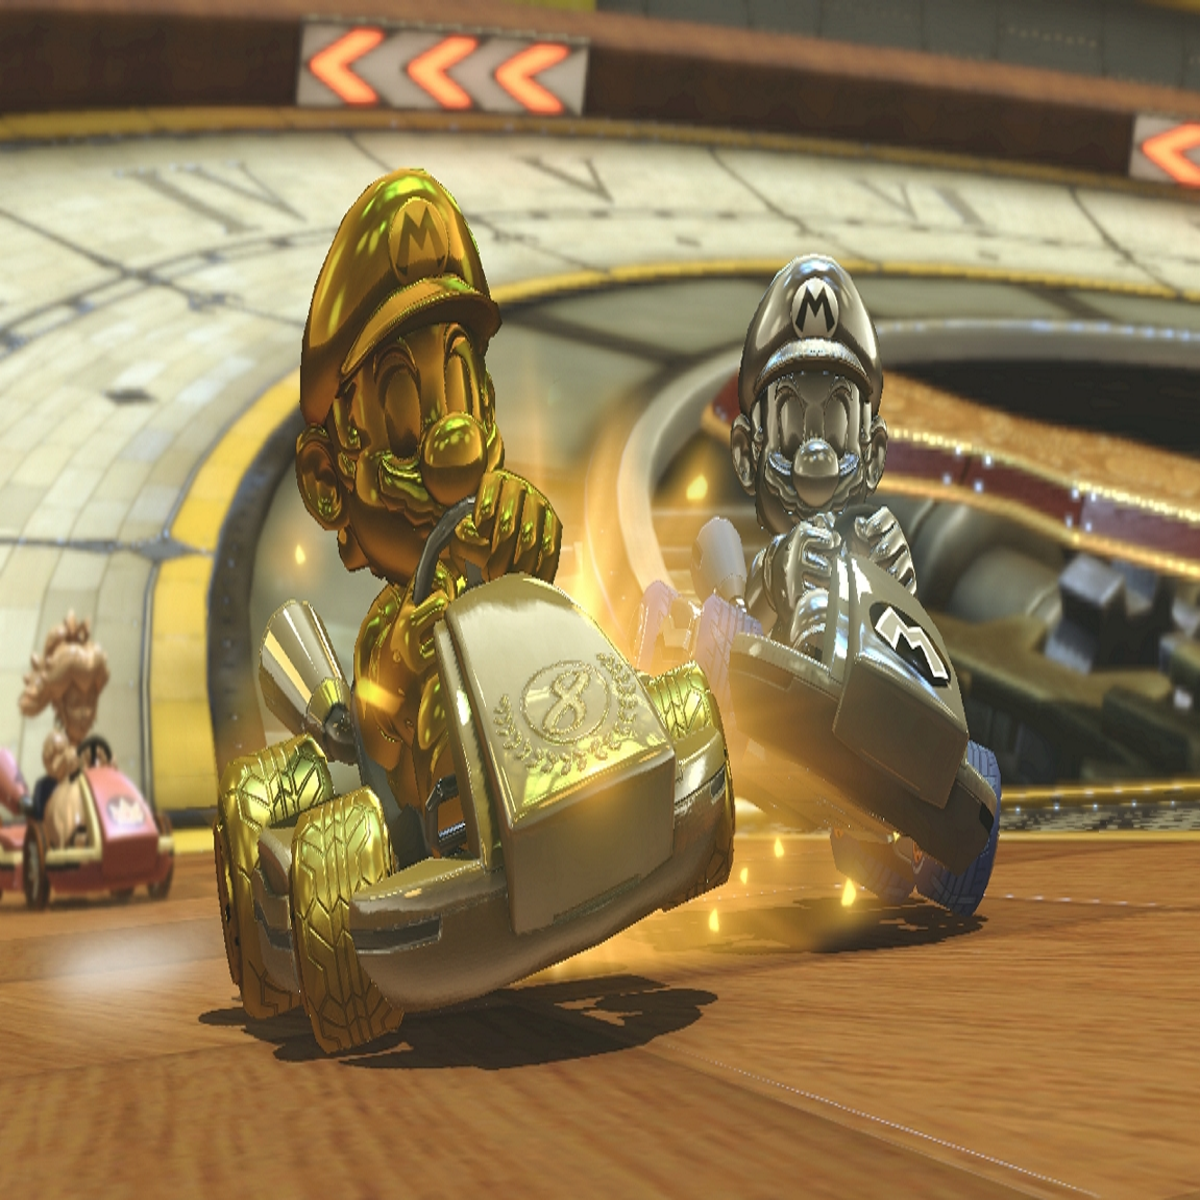 Mario Kart 8 Deluxe tips: How to win every race